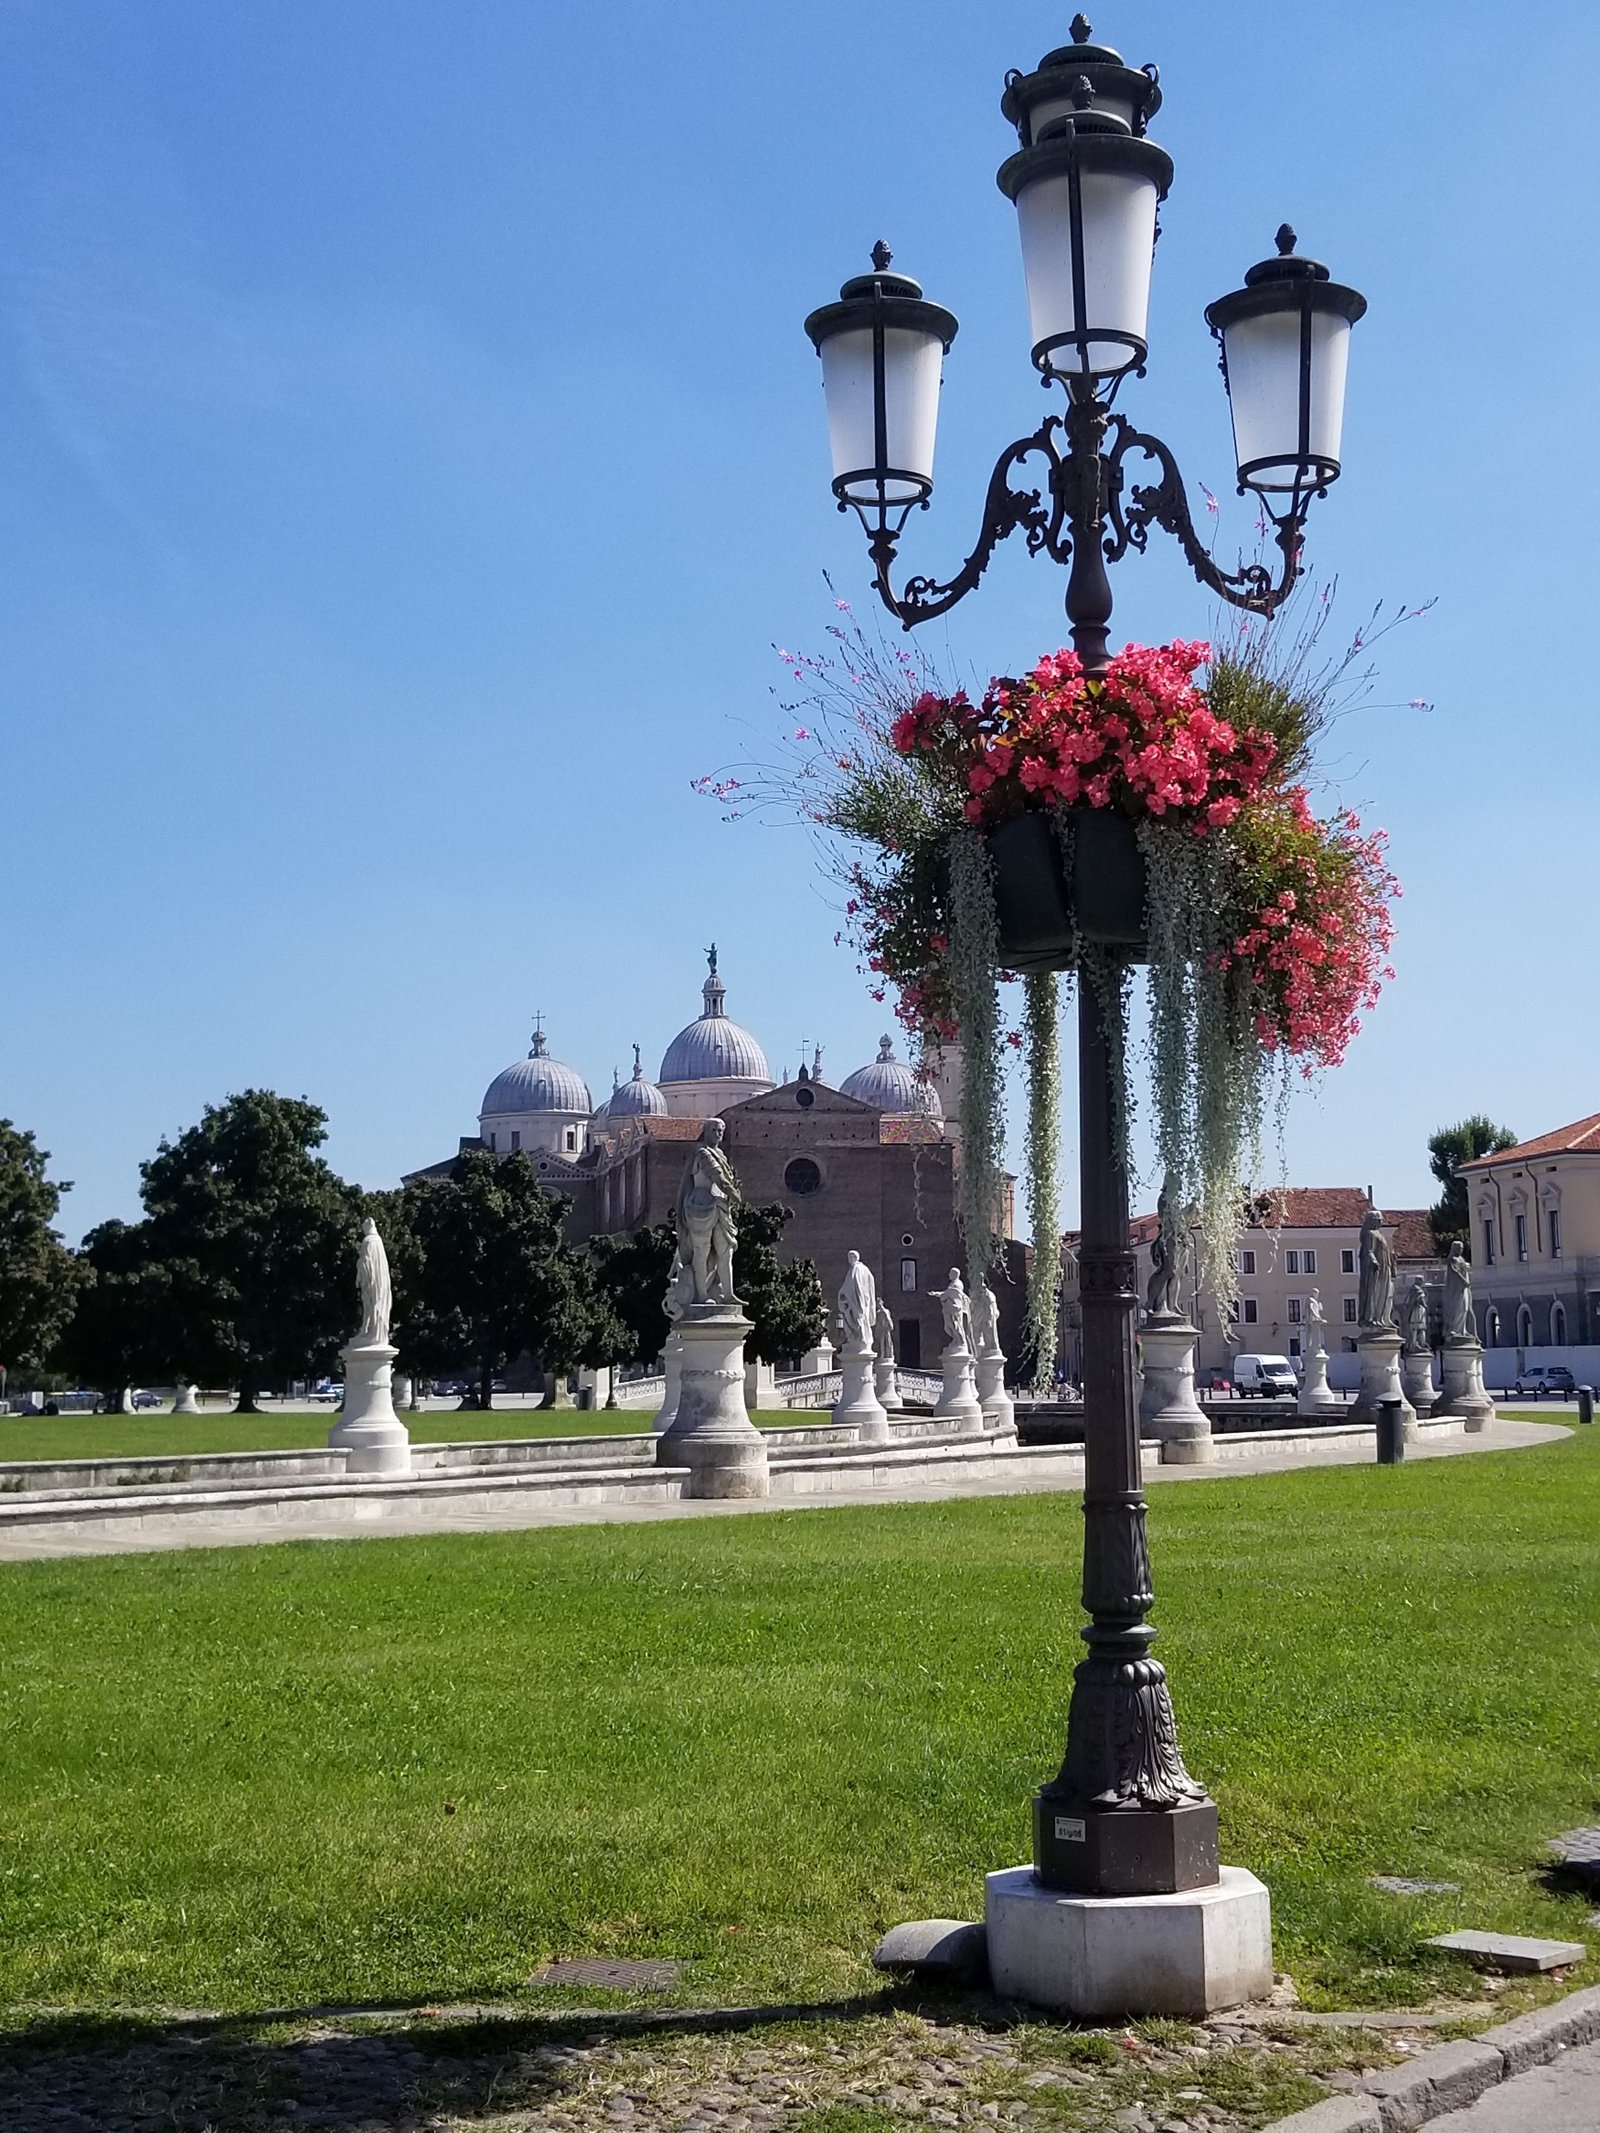 Months 9 & 10 for our 1-year adventure in Italy. New towns explored. https://ouritalianjourney.com/months-9-10-1-year-adventure-in-italy, Padova